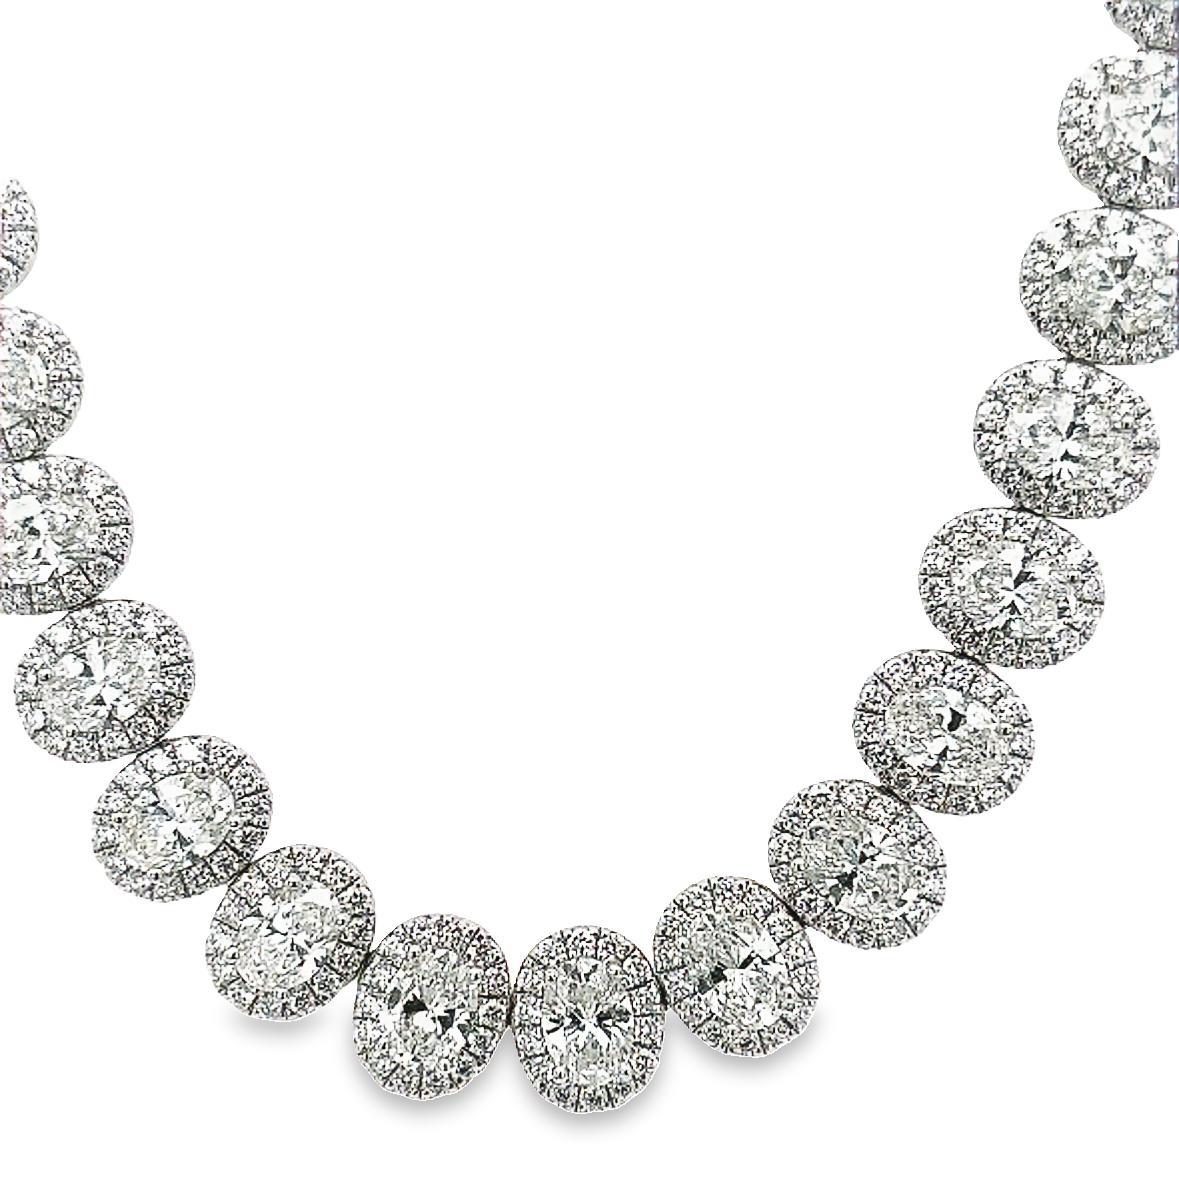 Crafted with exquisite 20.93CT T.W. diamonds, this statement necklace exudes luxury and sophistication. Elegantly designed in an oval cut, its sleek appearance accentuates any outfit and will be the perfect accessory for red-carpet occasions.